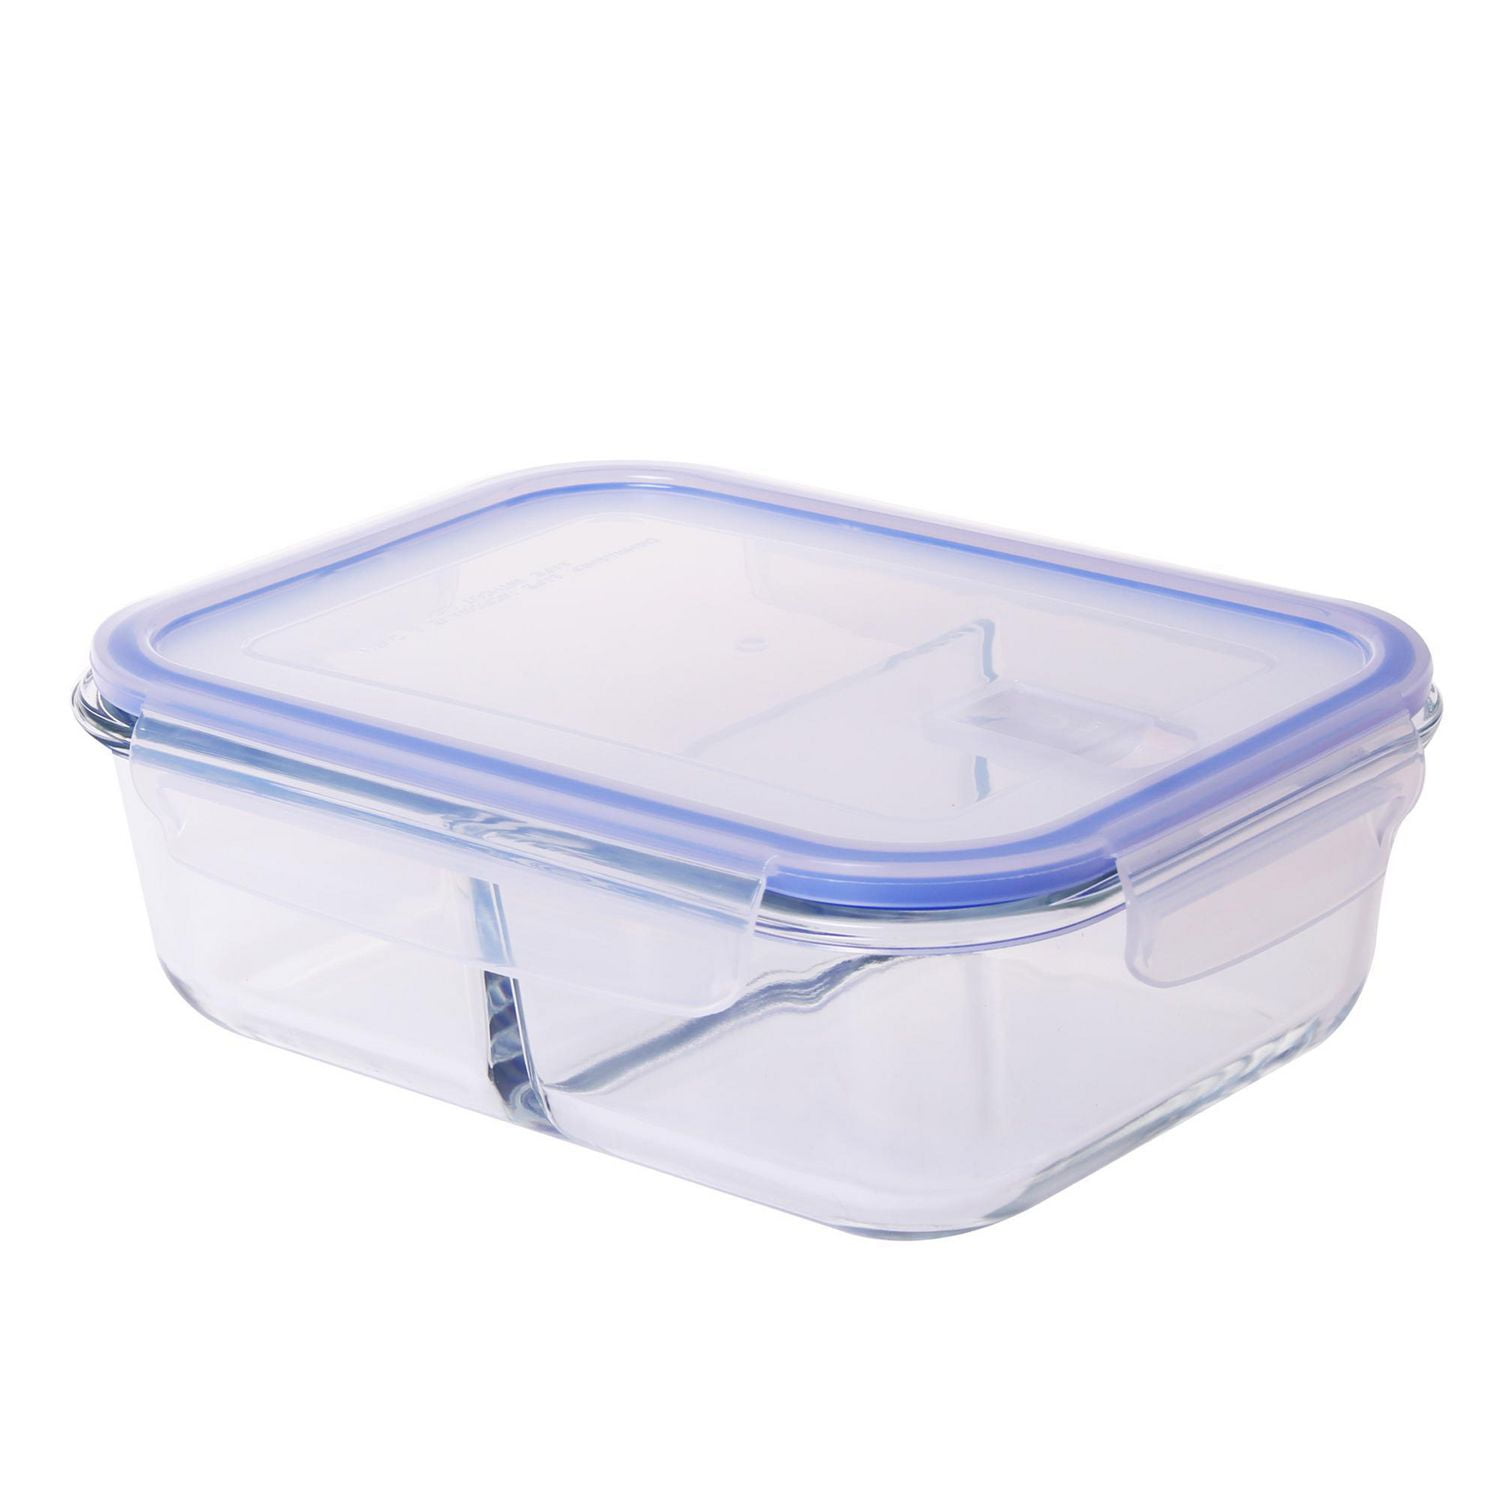 Shop Glass Food Container With Dividers online